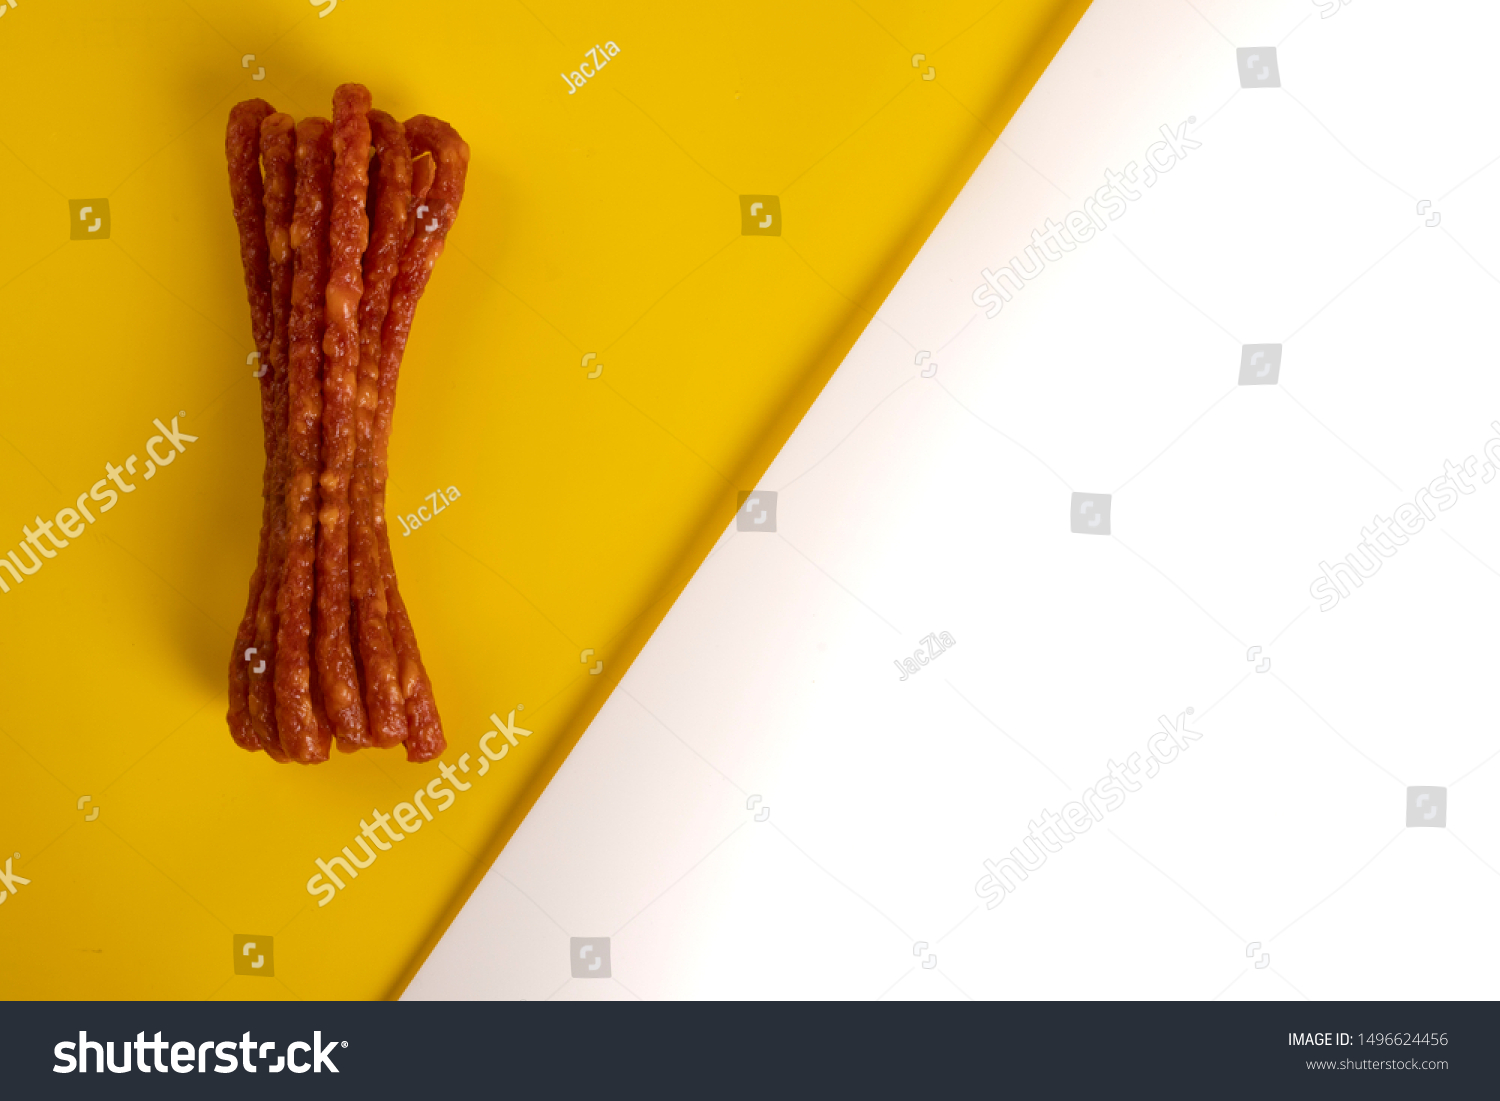 Download Dry Sausages Thin Sausages On Yellow Stock Photo Edit Now 1496624456 PSD Mockup Templates